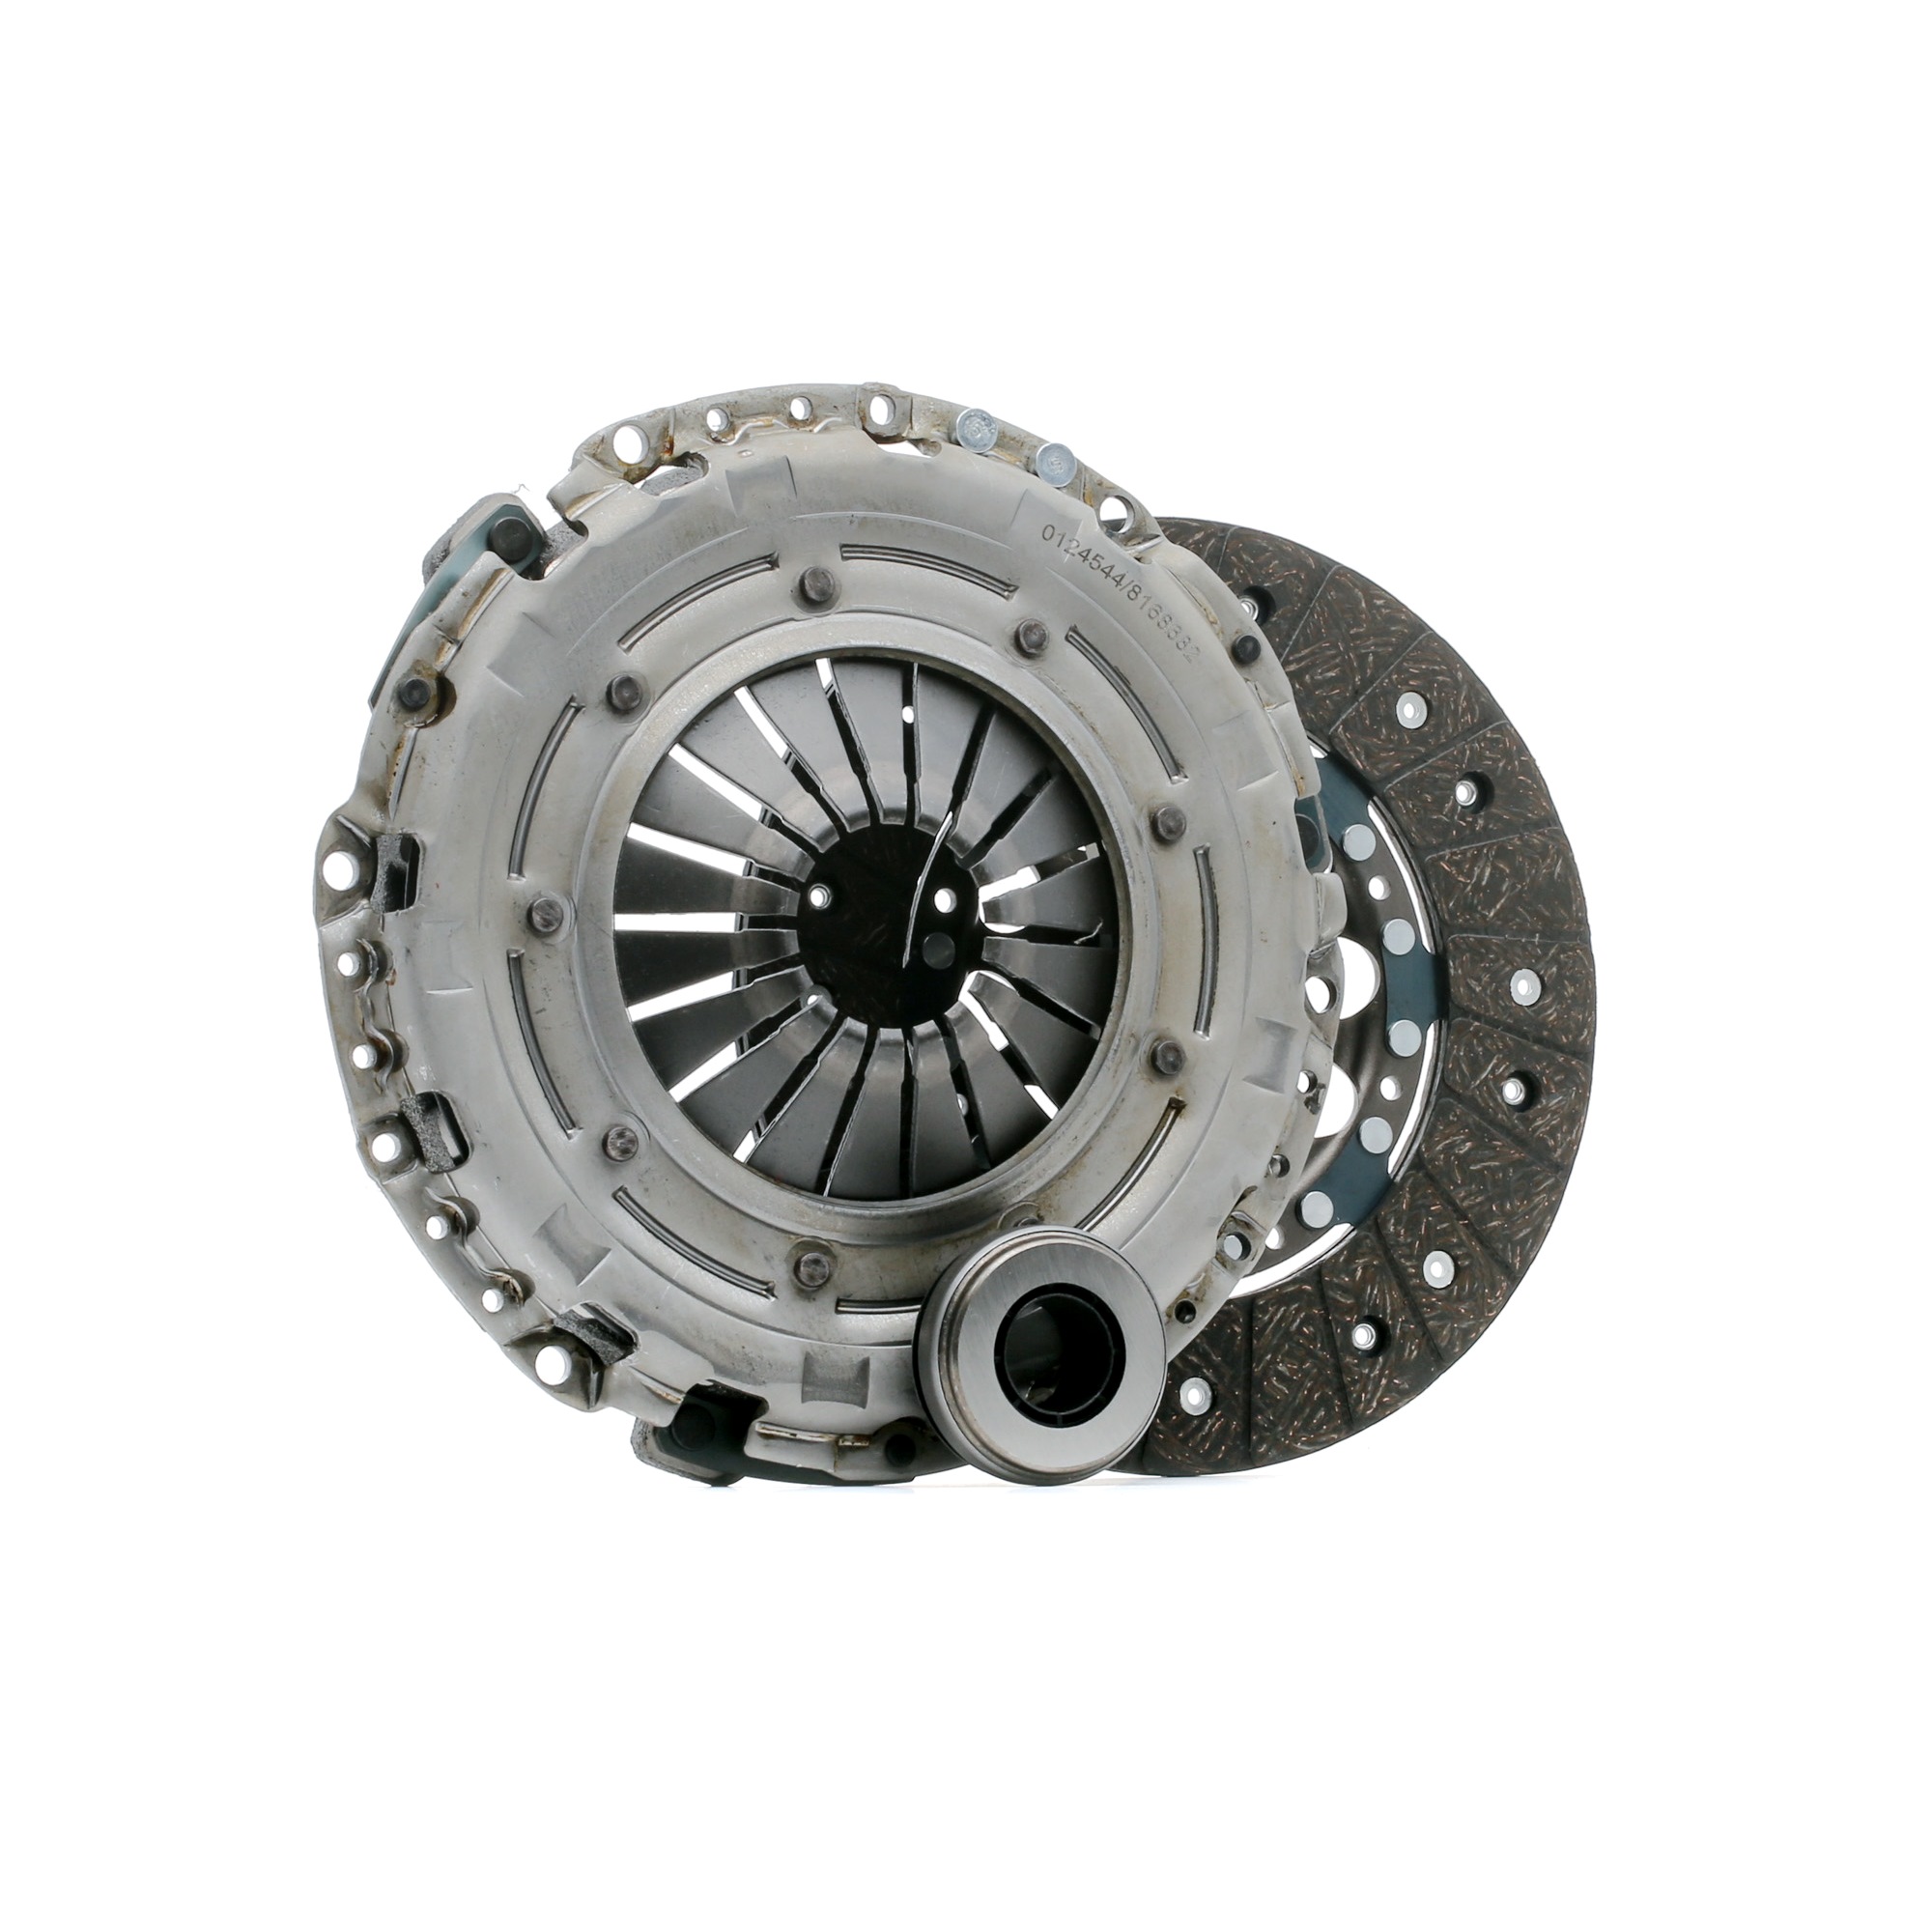 STARK SKCK-0100161 Clutch kit for engines with dual-mass flywheel, three-piece, with clutch pressure plate, with clutch disc, with clutch release bearing, 236mm